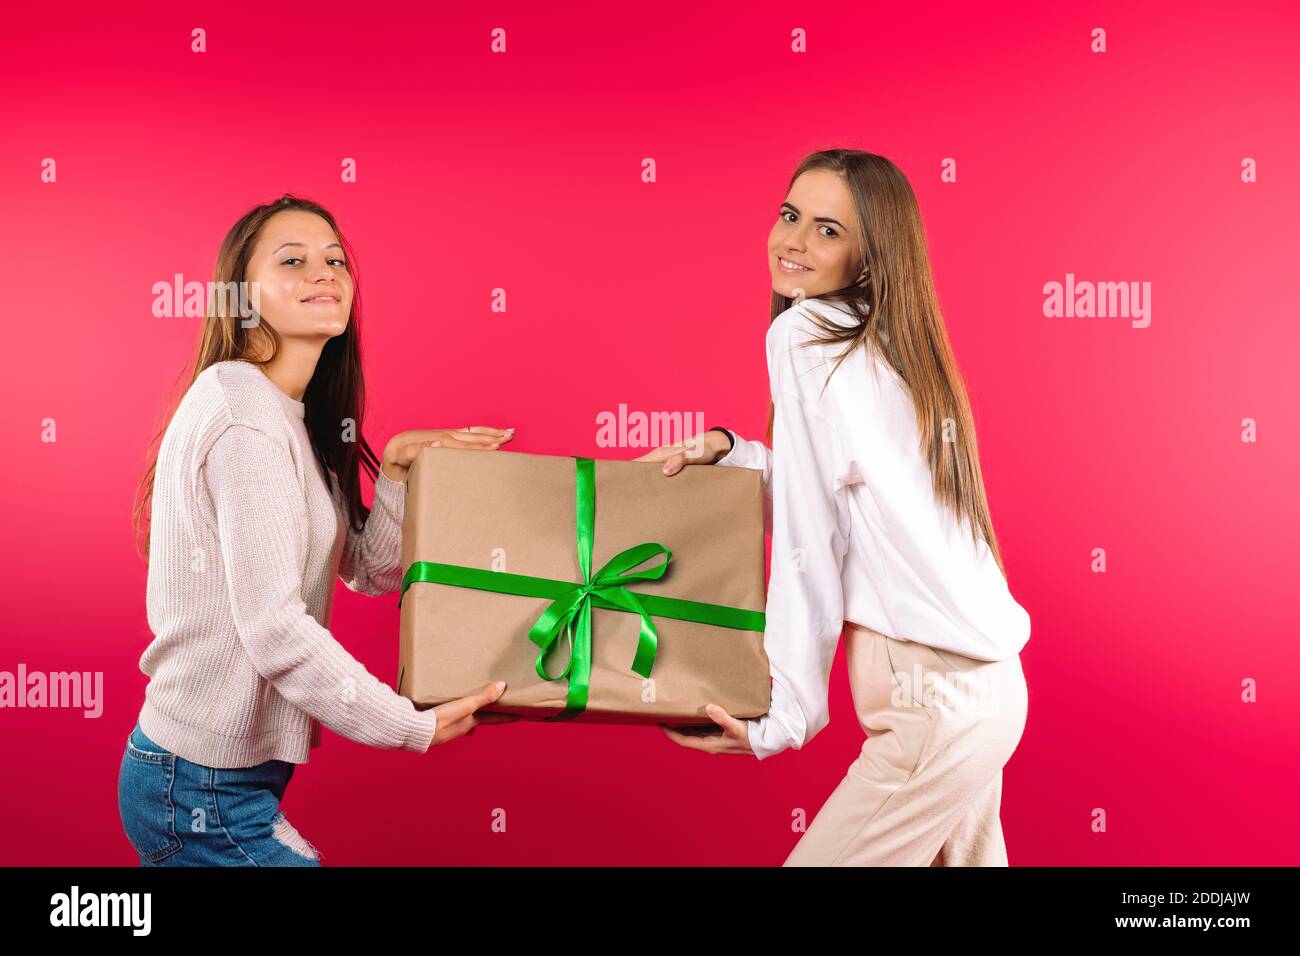 Beautiful girls posing with big gift box on a pink background. Holiday concept. Stock Photo